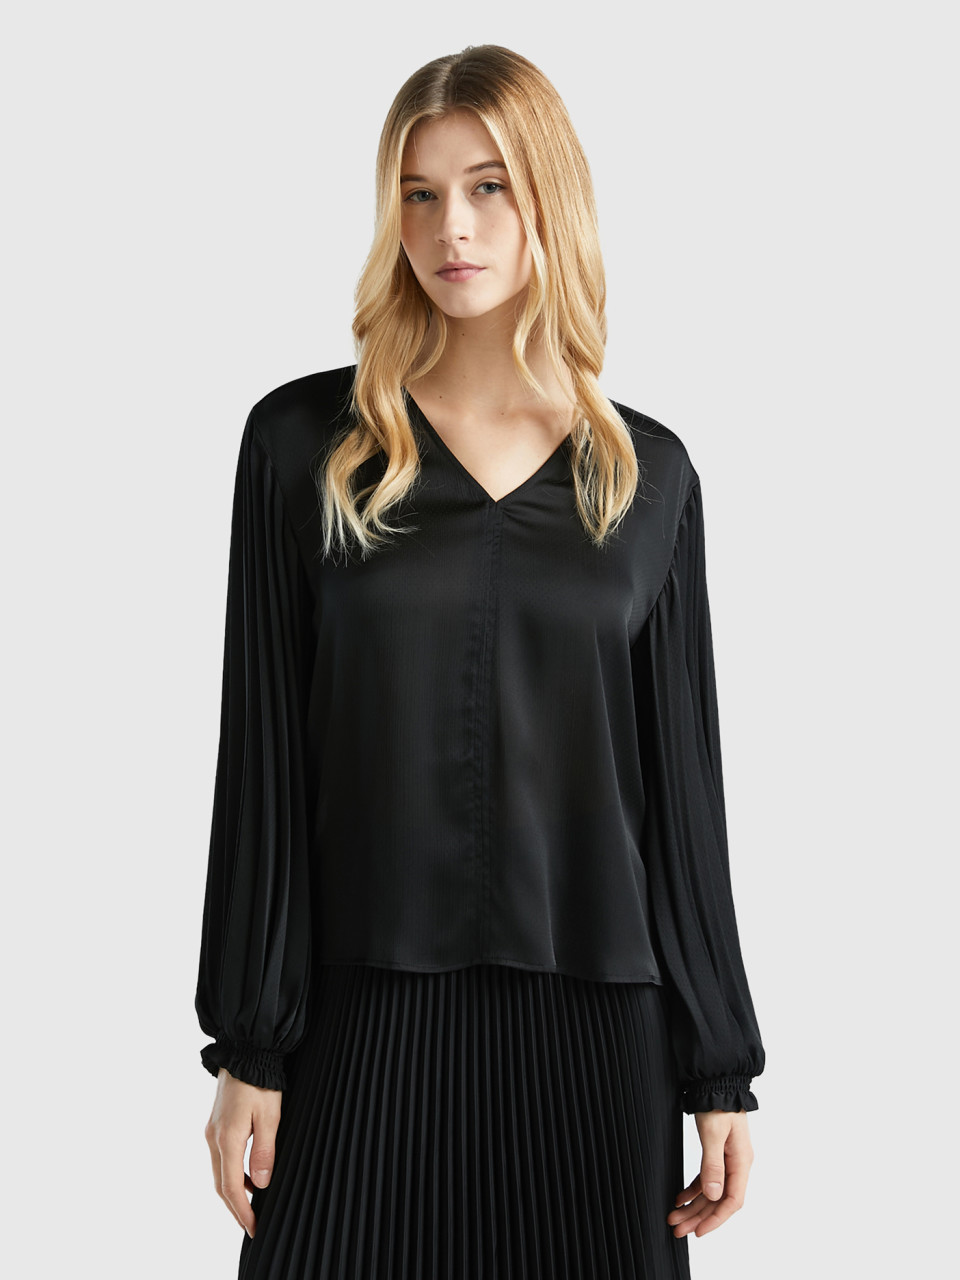 Benetton, Blouse With Long Pleated Sleeves, Black, Women